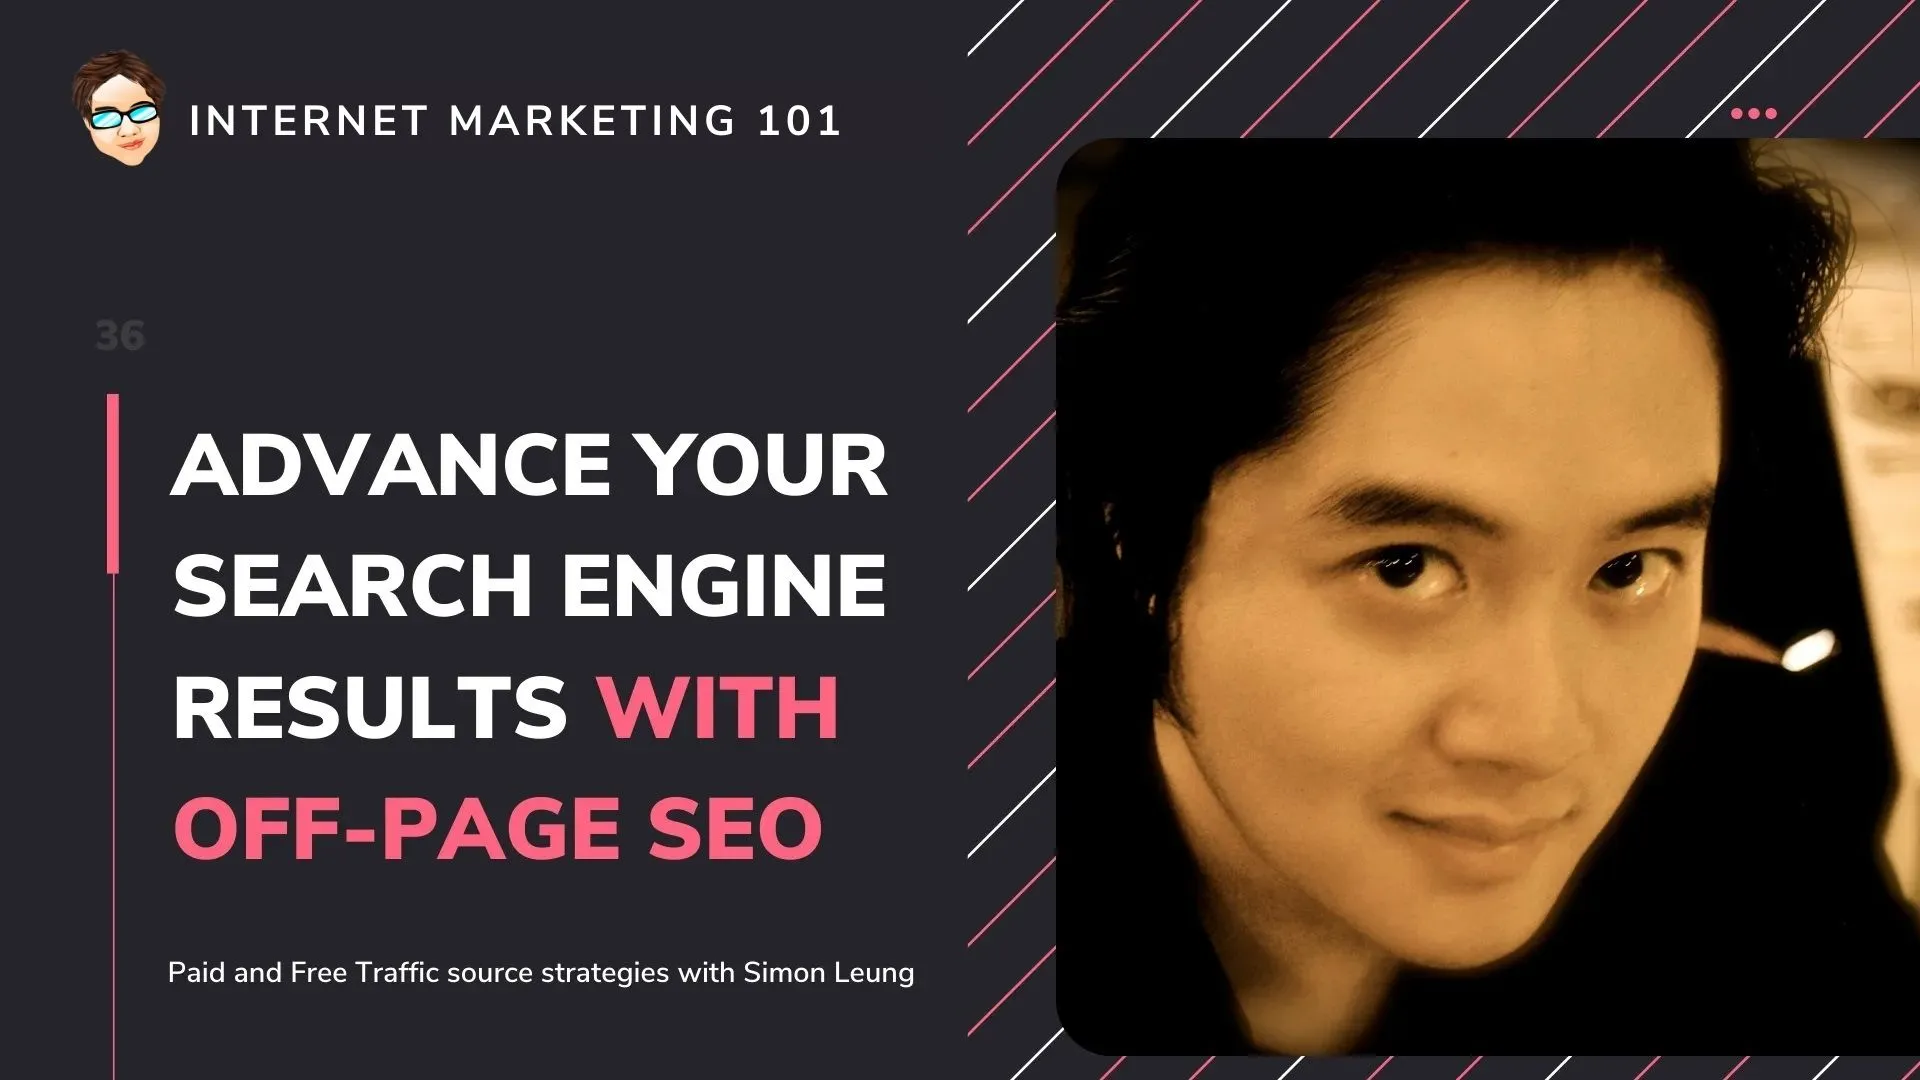 Internet Marketing 101 - Advance Your Search Engine Results With Off-Page SEO (Simon Leung)